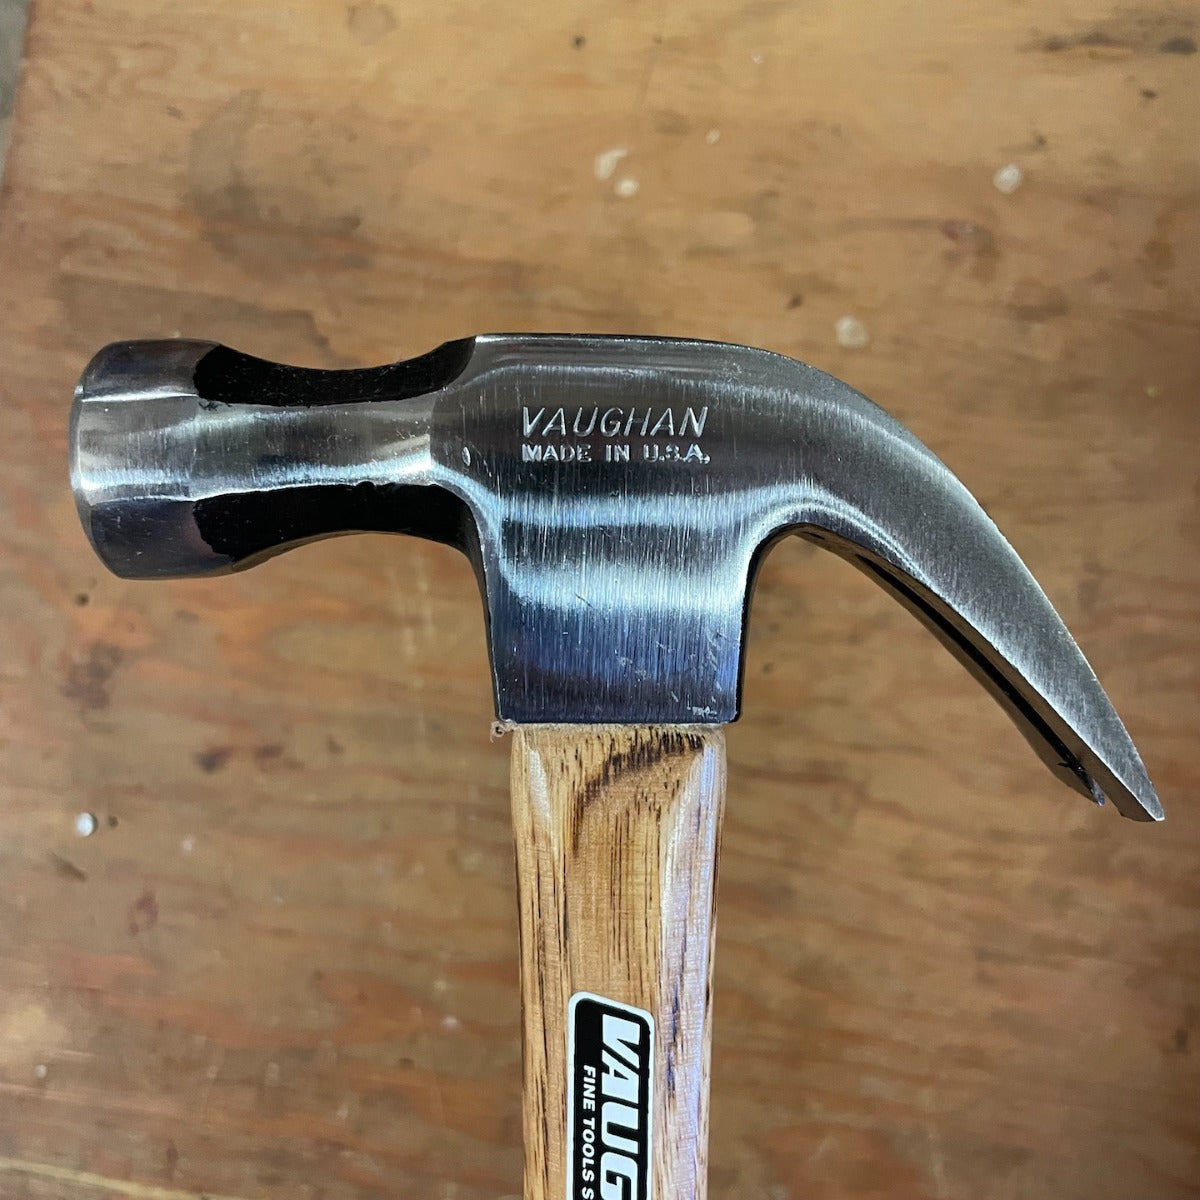 NOS Vaughan S20 20 oz Octagon Wood Handled Claw Hammer (S20)